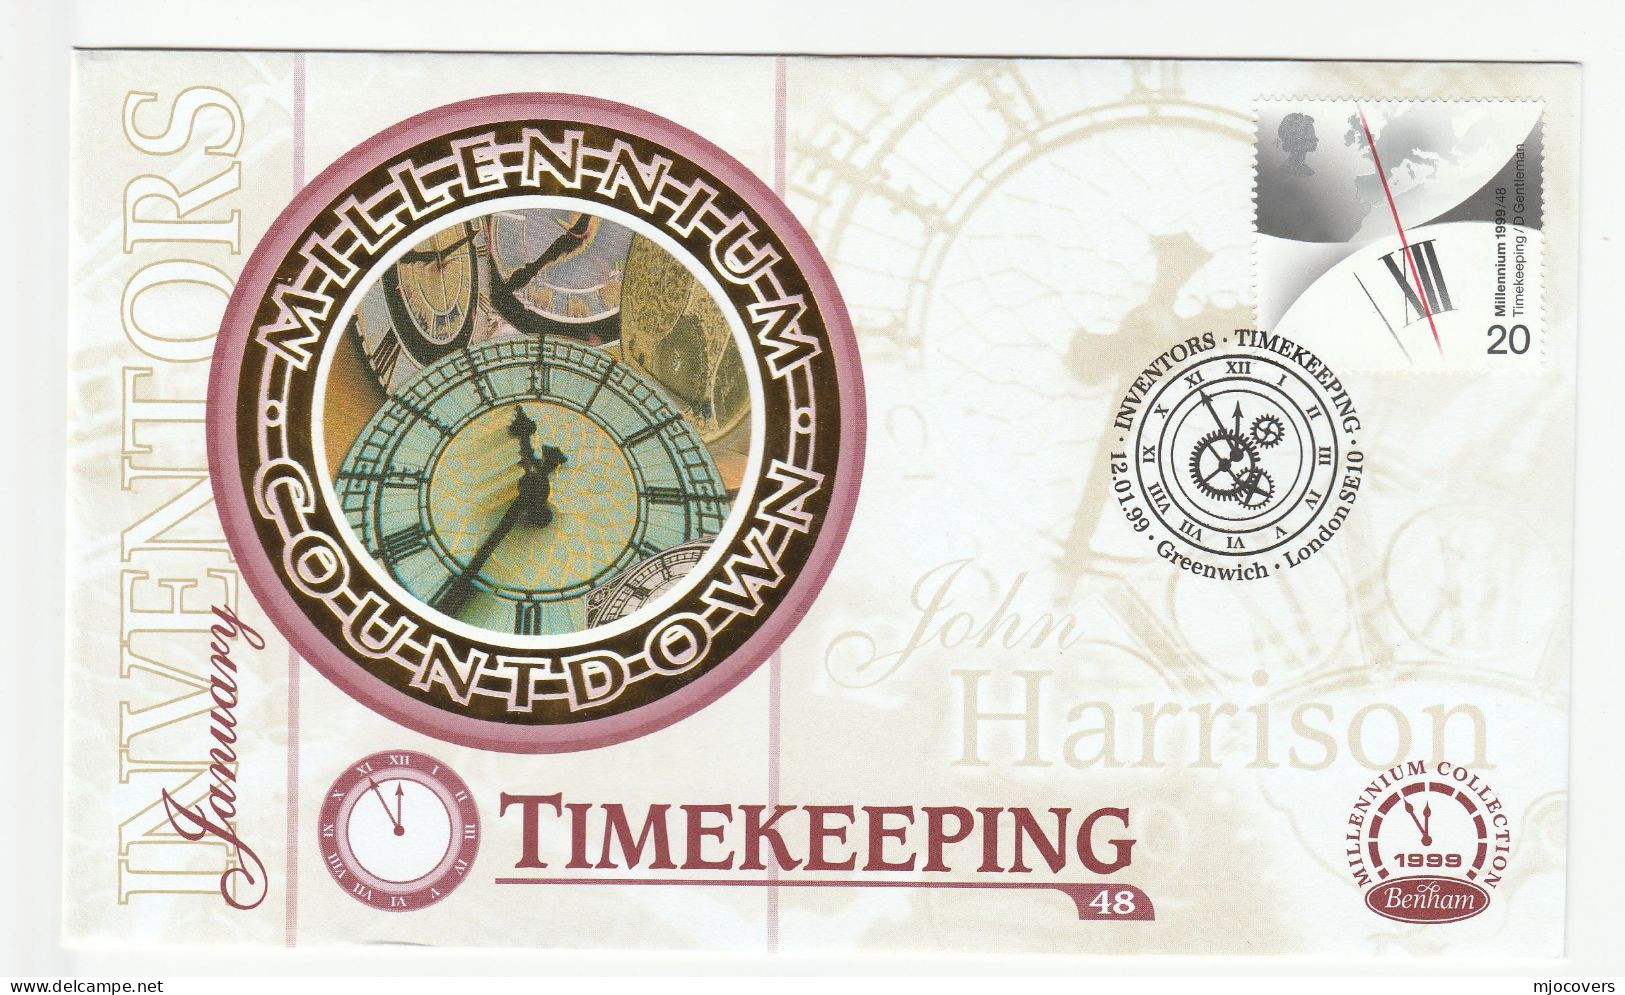 CLOCK  Special SILK  GREENWICH  FDC 1999 Timekeeping Stamps  GB Cover Clocks - Relojería